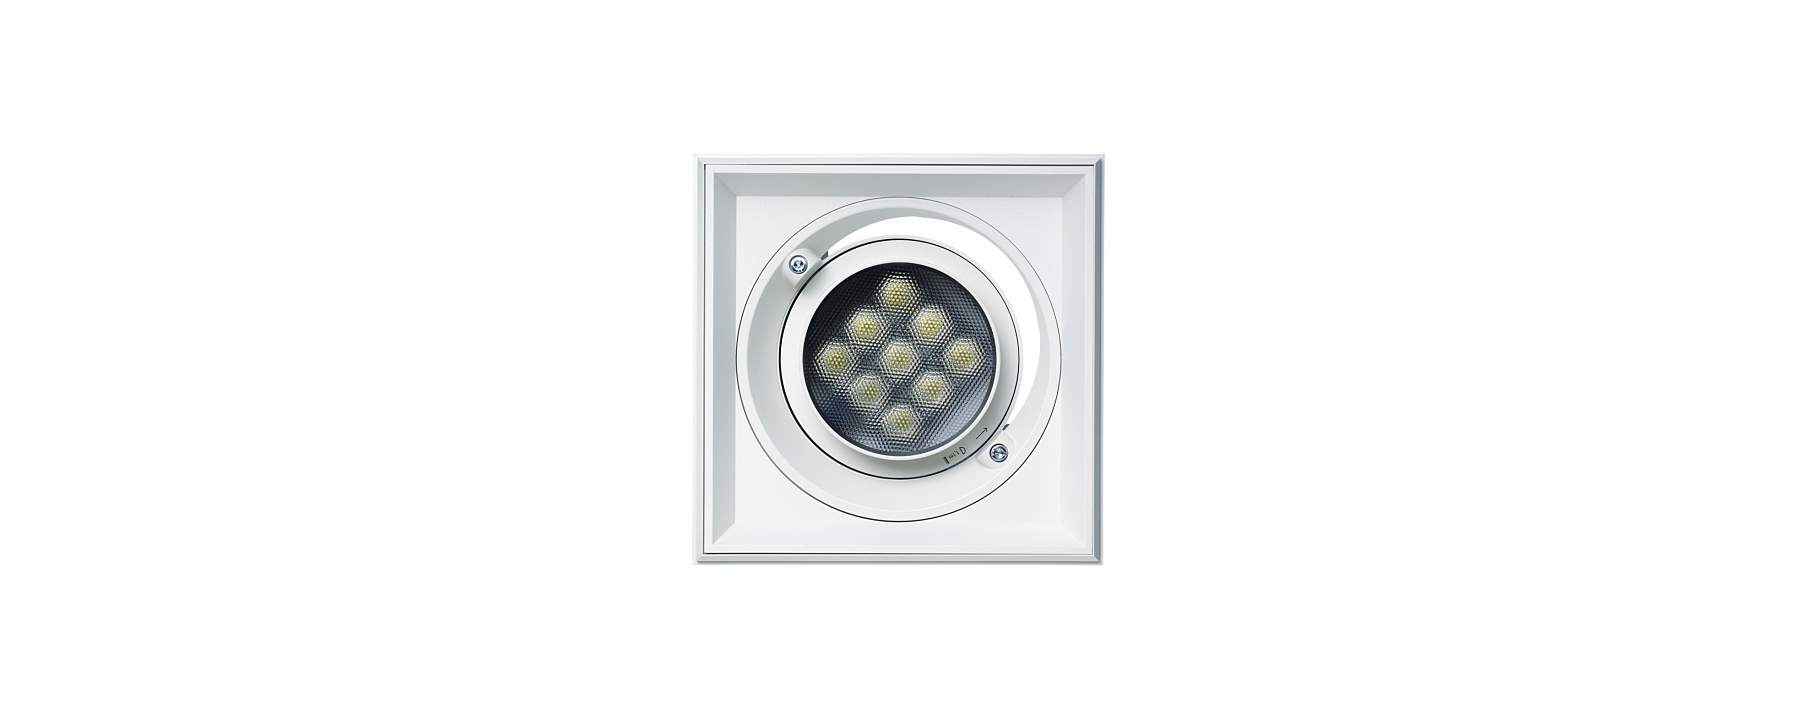 Quintessence square - Recessed spotlights, recessed floodlights and recessed wallwashers